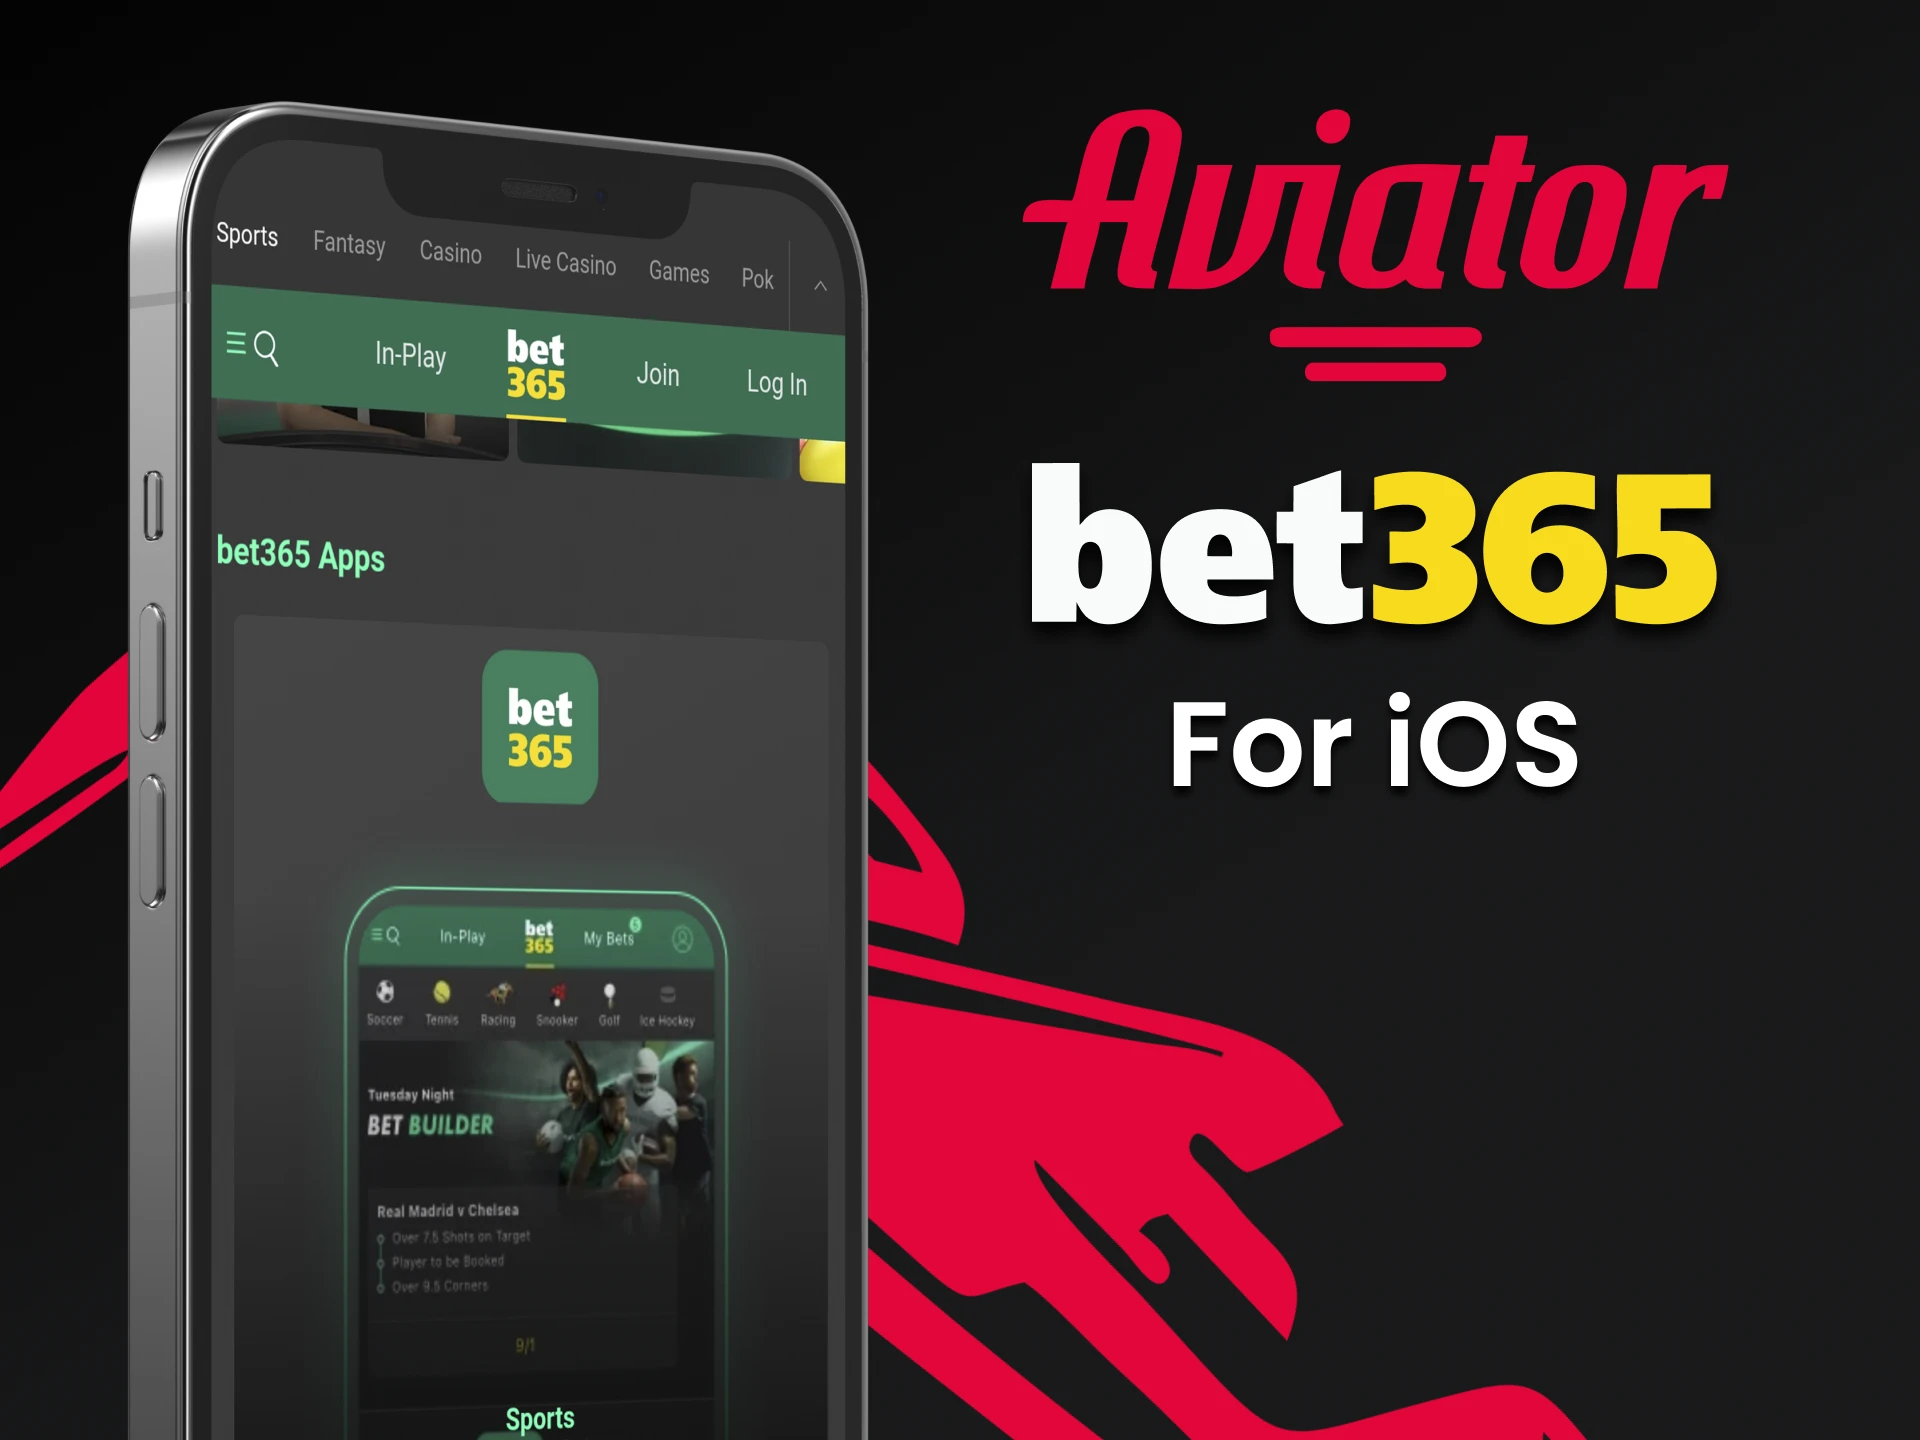 Download the Bet365 app to play Aviator on iOS.